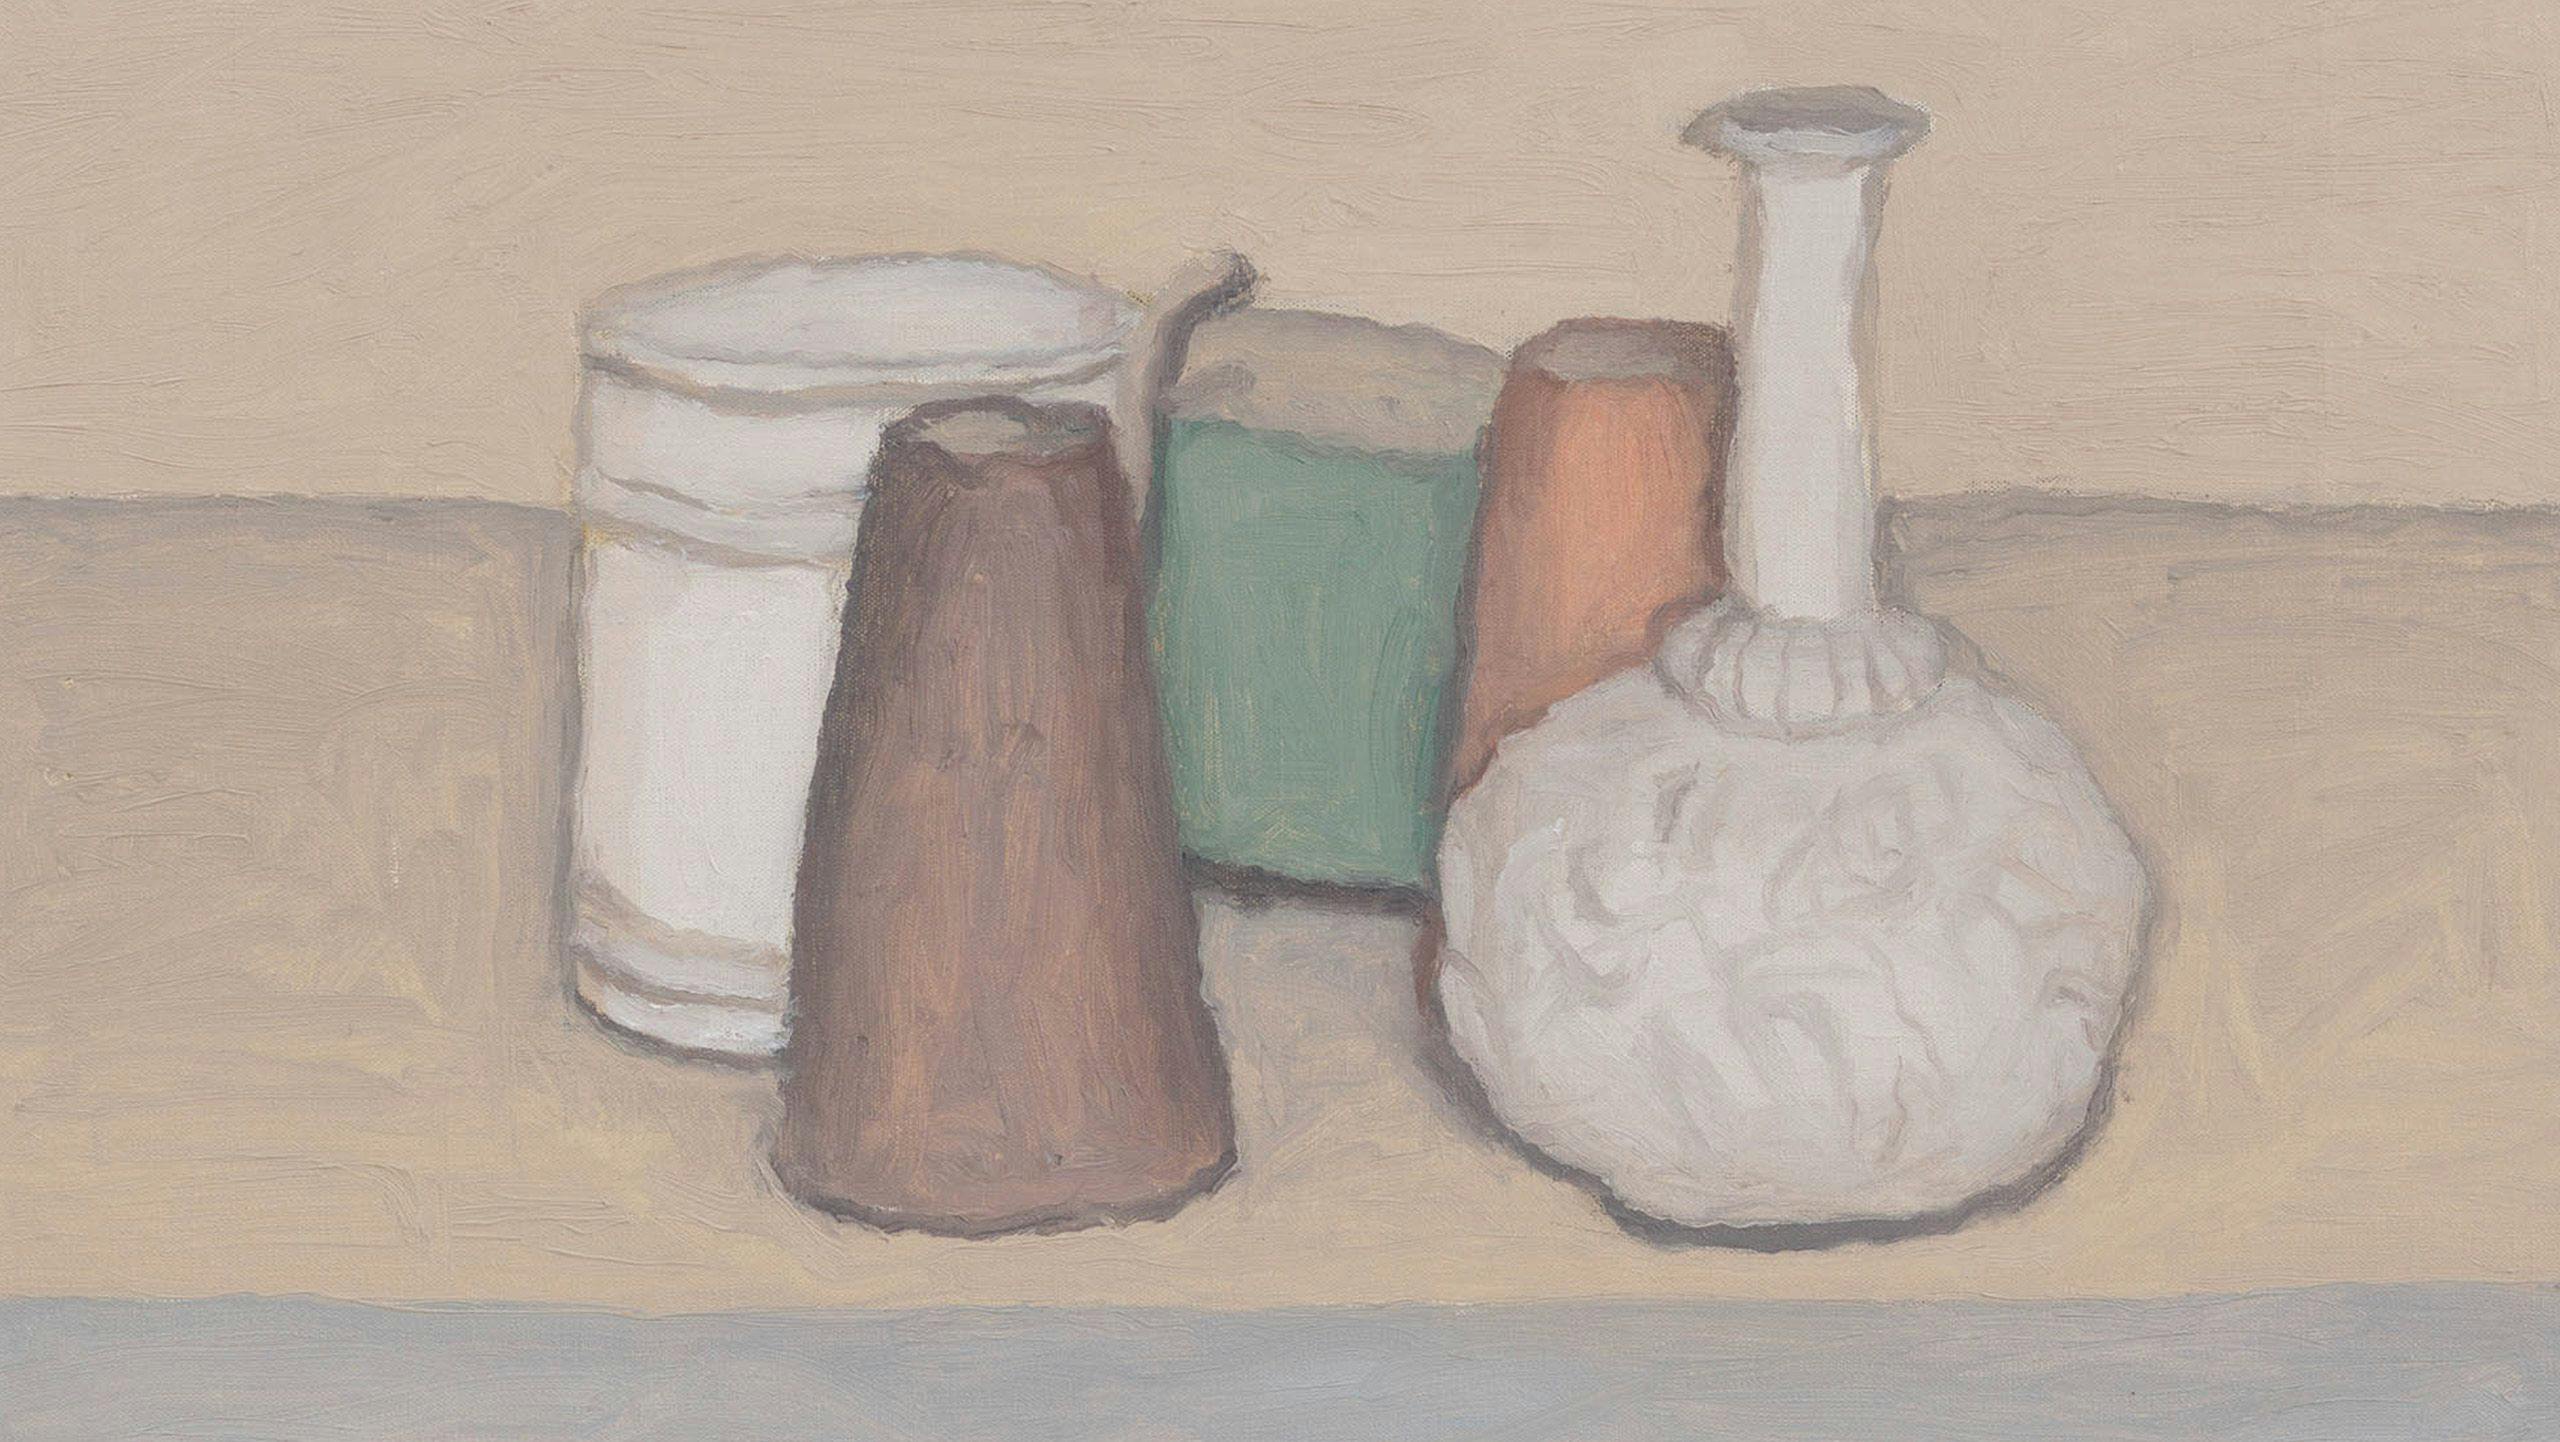 A painting by George Morandi, titled Natura morta (Still Life), dated 1952.